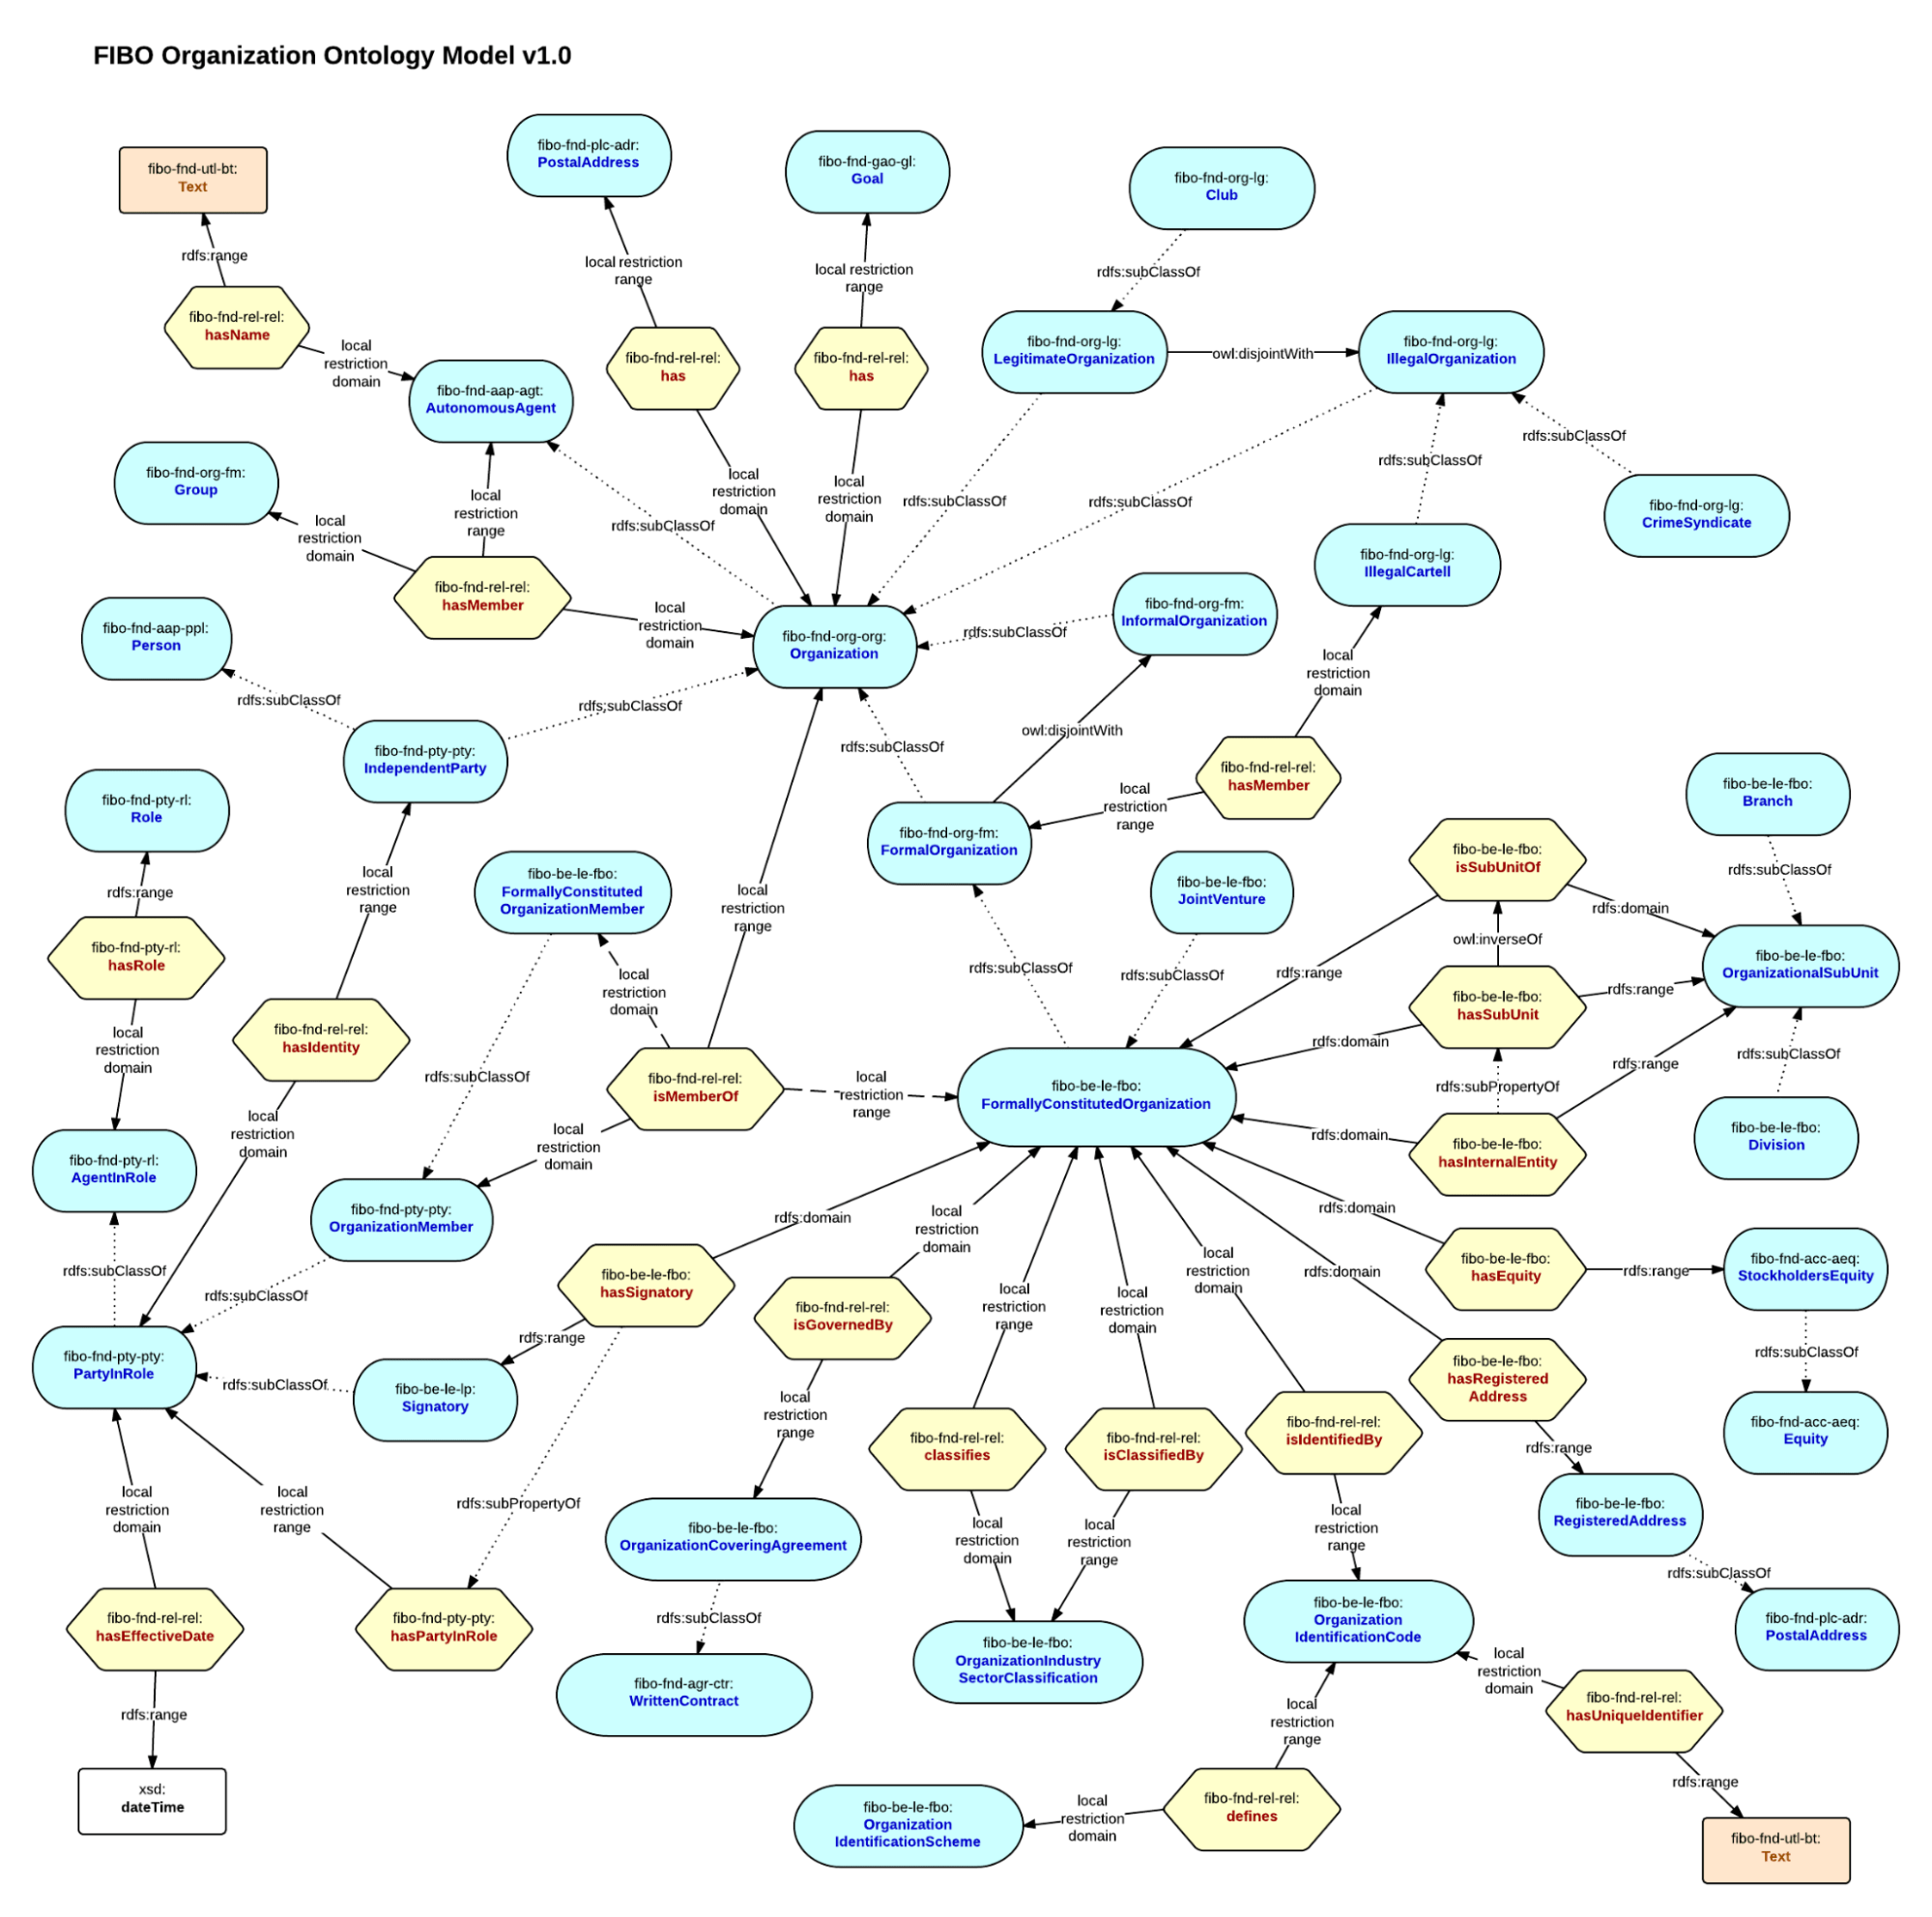 Figure 6 - excerpt of the Financial Industry Business Ontology